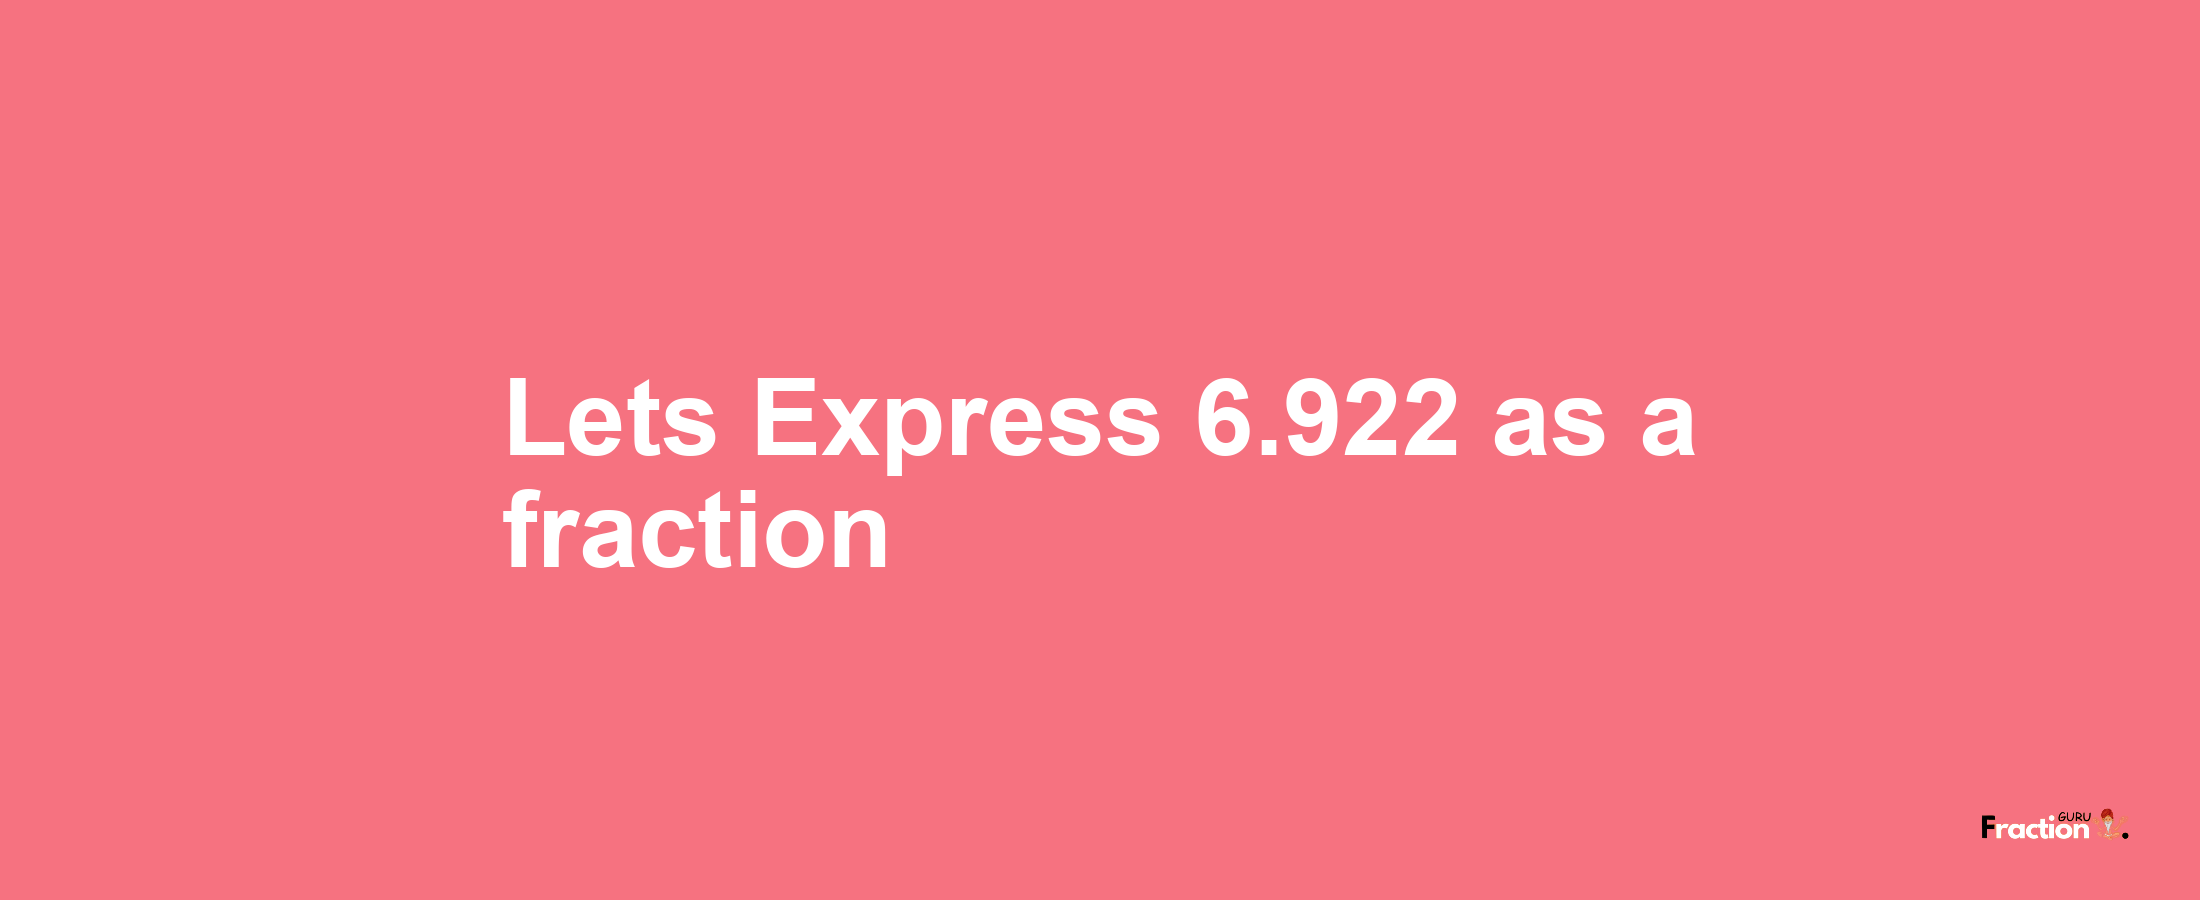 Lets Express 6.922 as afraction